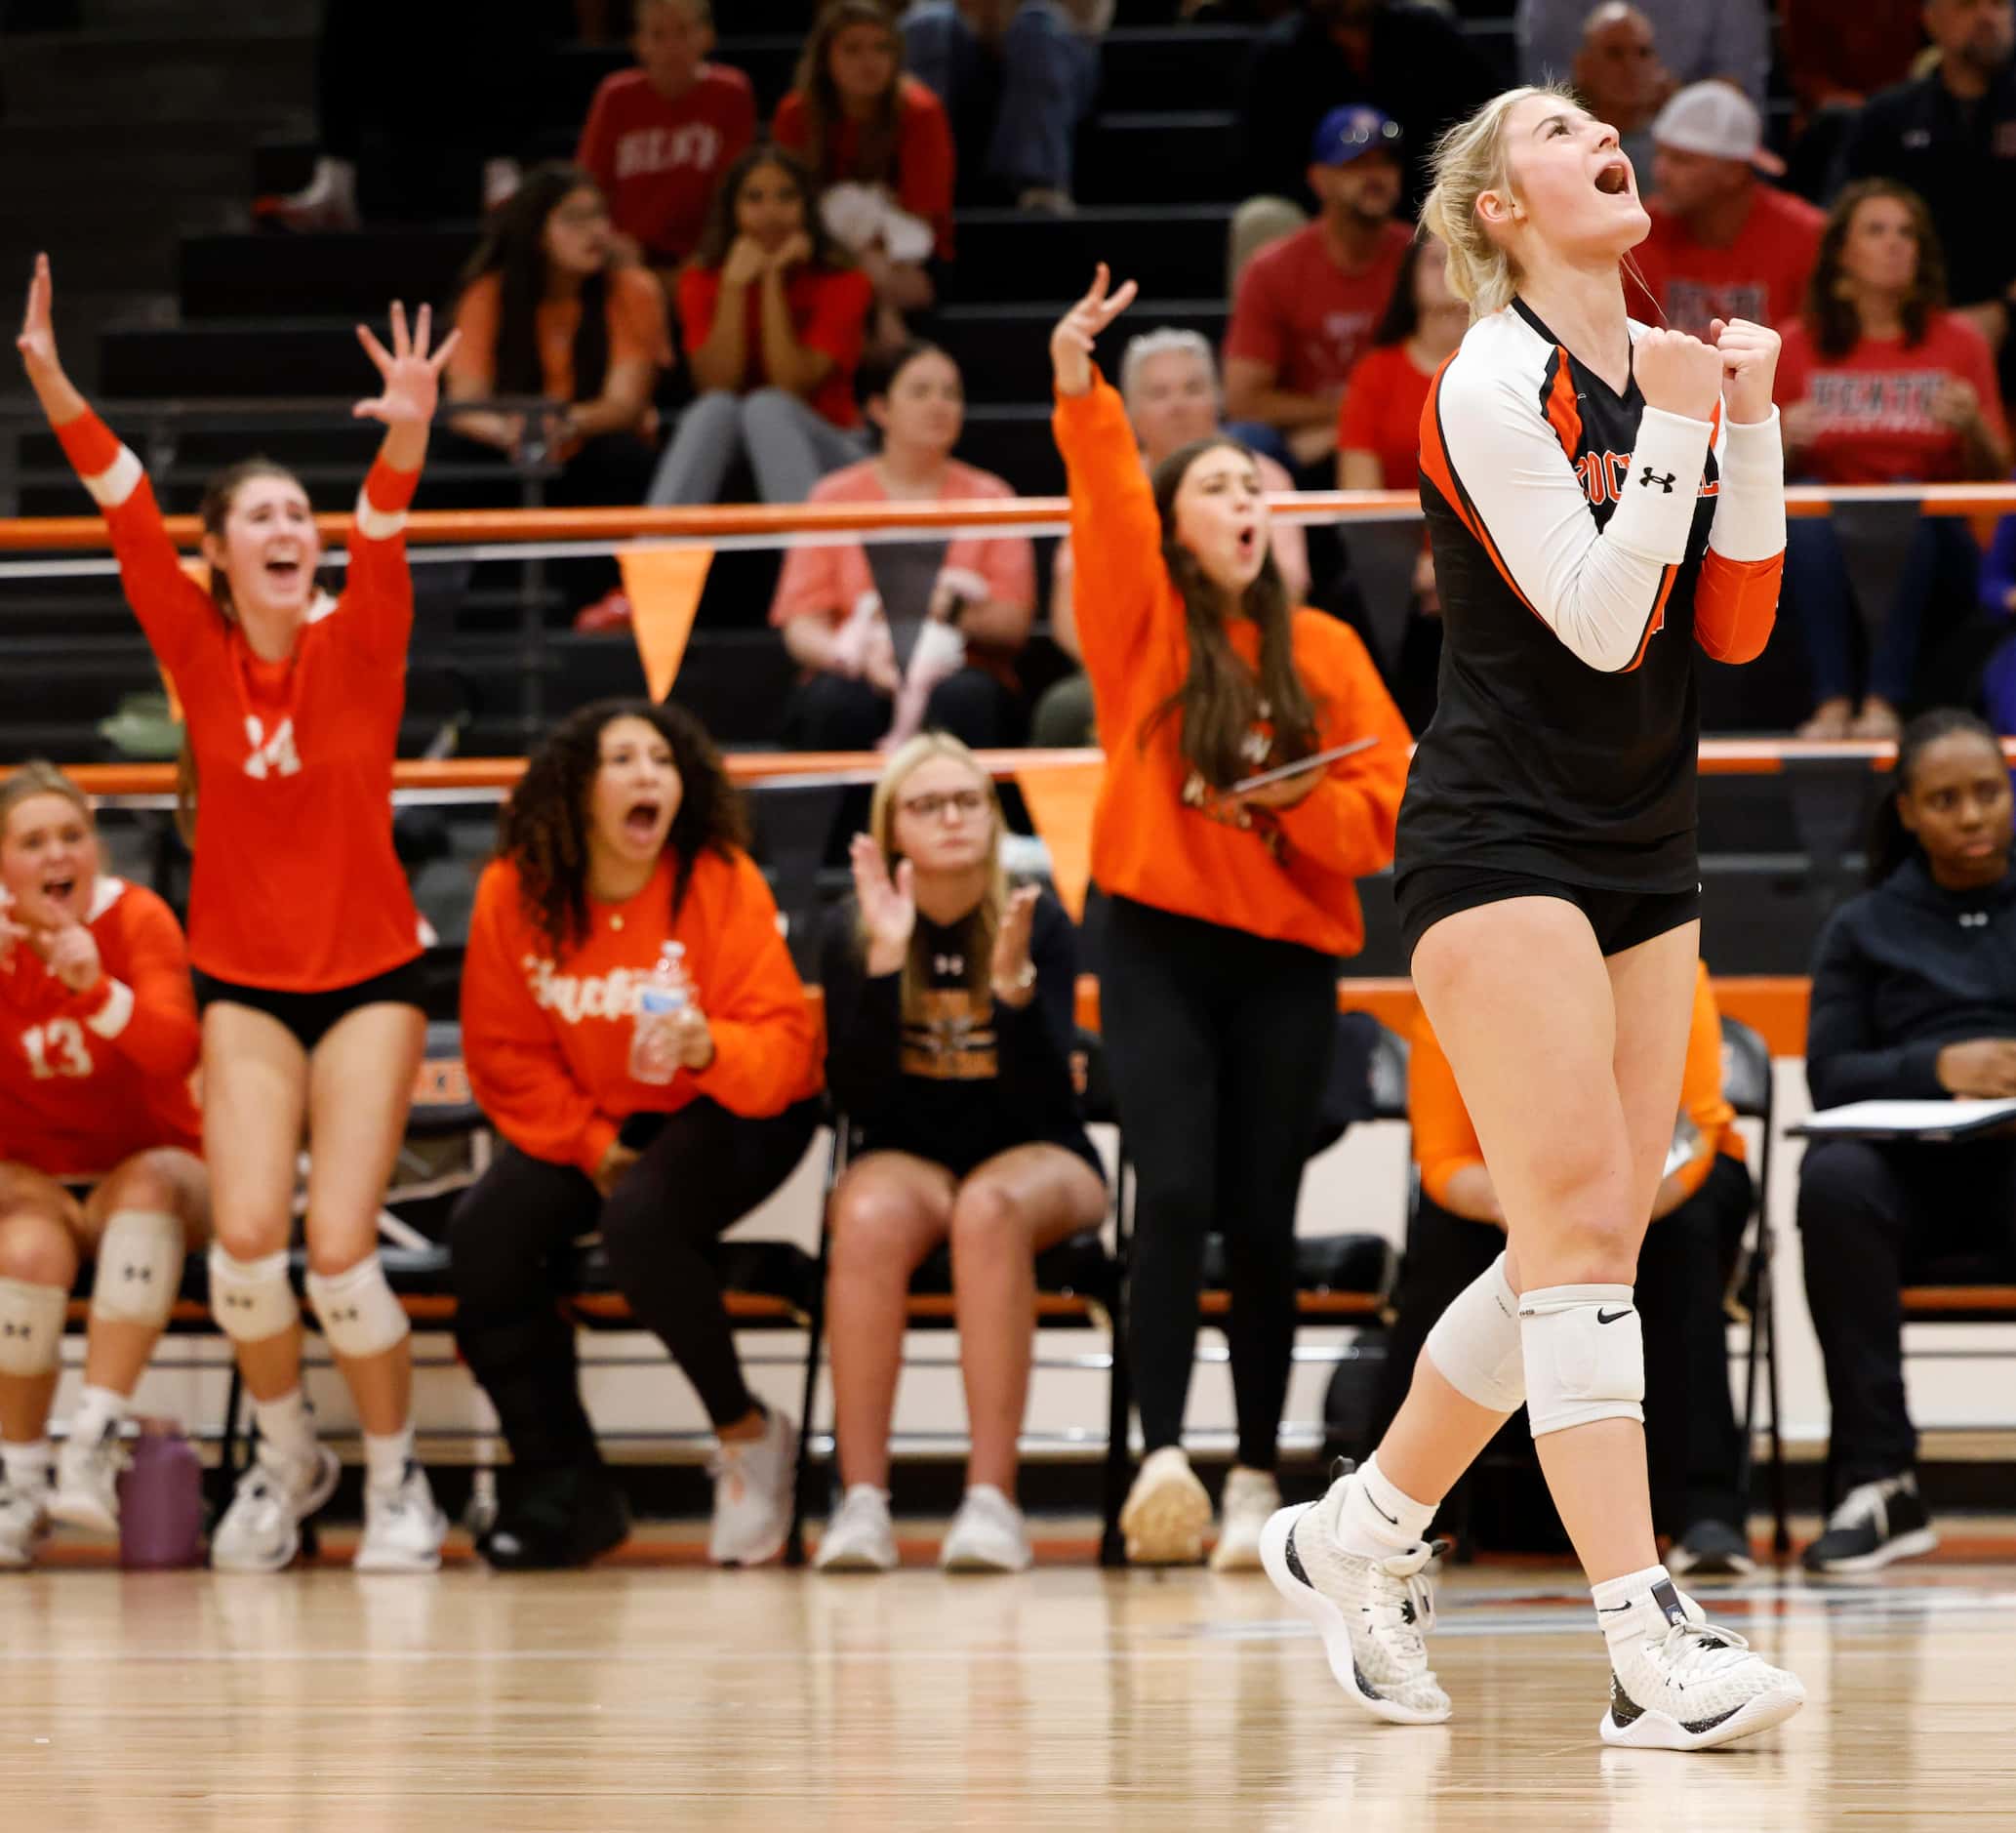 Rockwall high’s Sophia Armstrong cheers after a point against Rockwall heath during a...